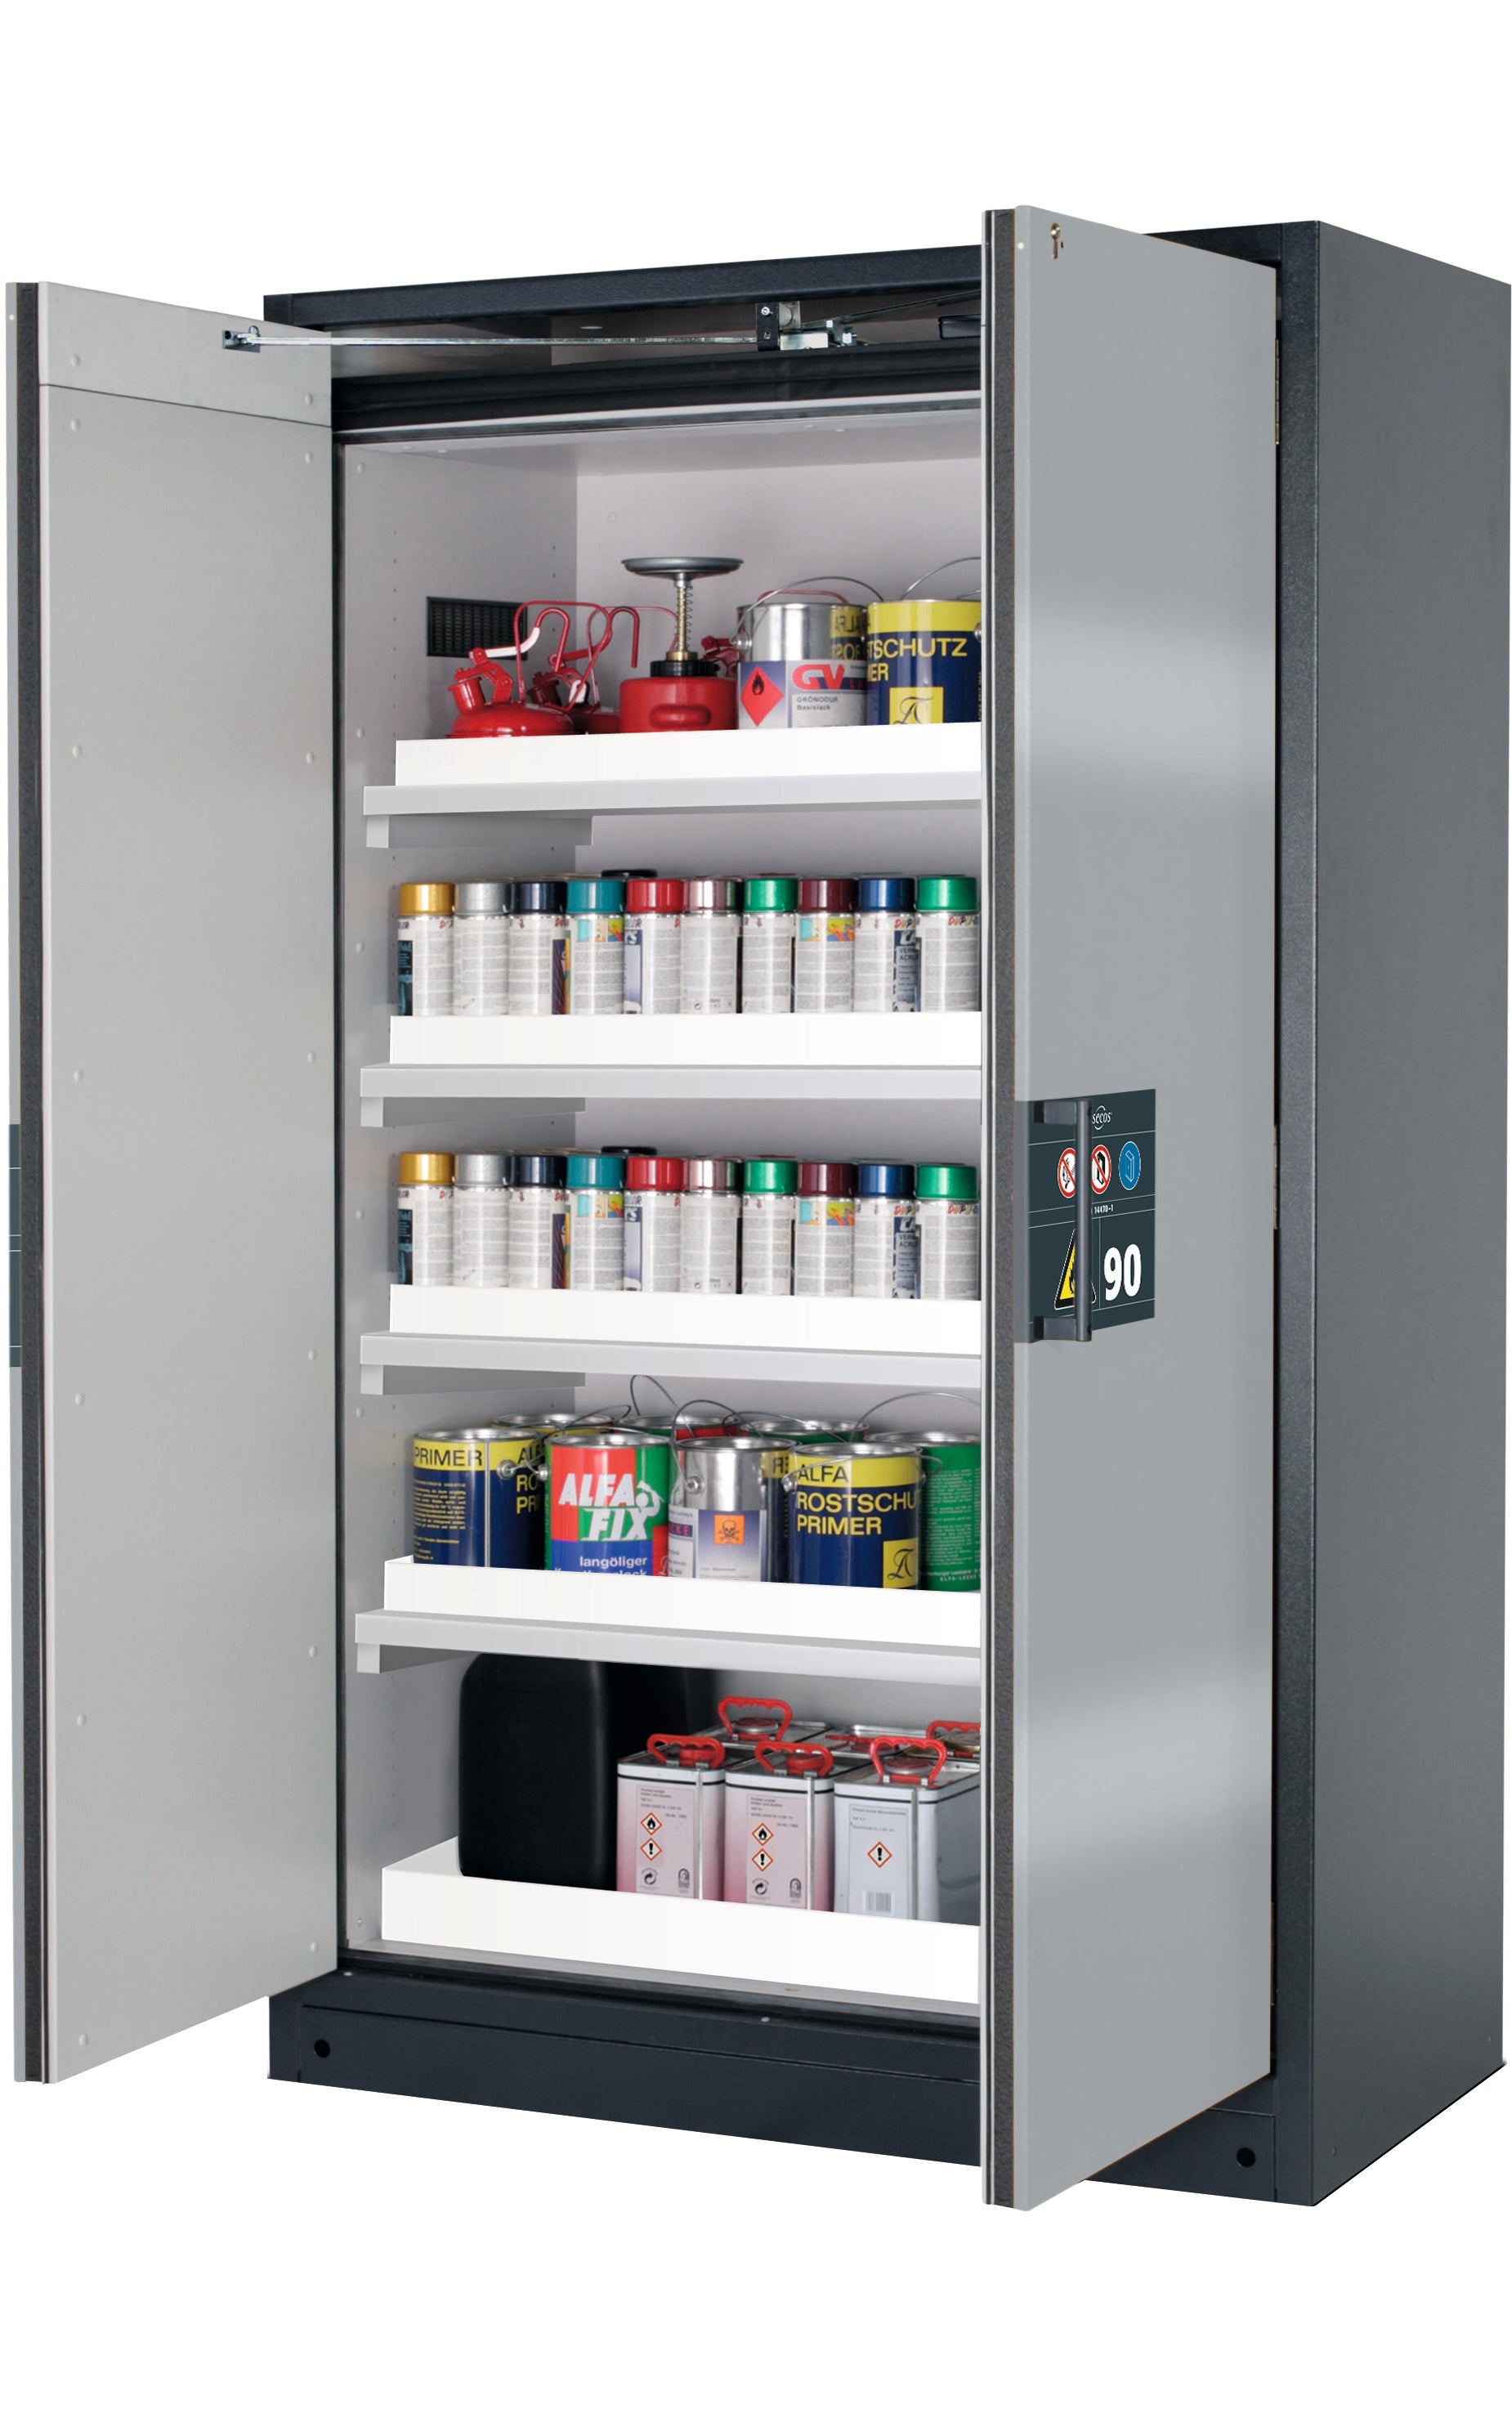 Type 90 safety storage cabinet Q-PEGASUS-90 model Q90.195.120.WDAC in asecos silver with 4x tray shelf (standard) (polypropylene),